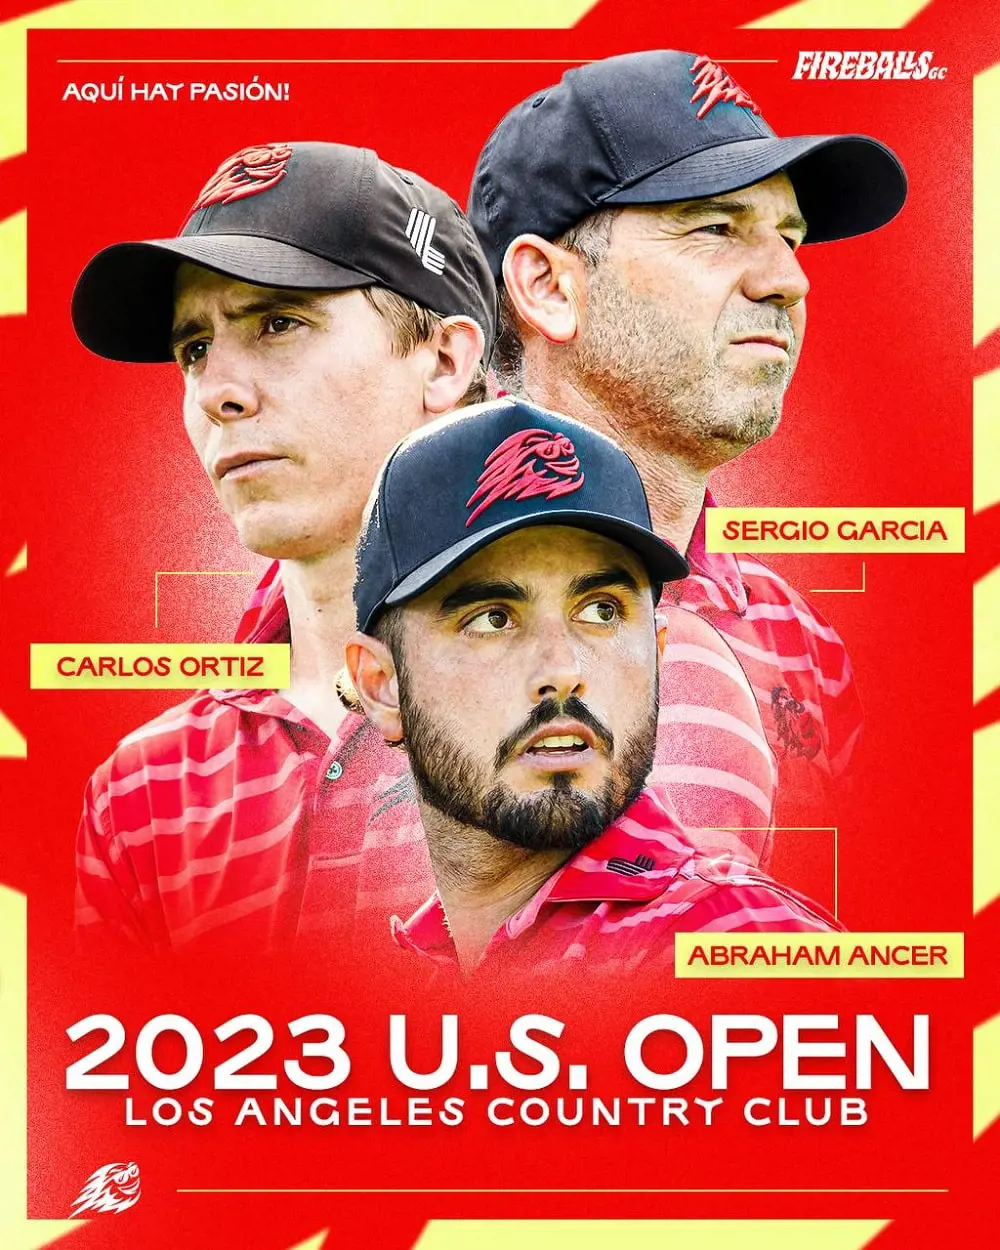 Three members of the Fireballs GC have qualified for the U.S. Open 